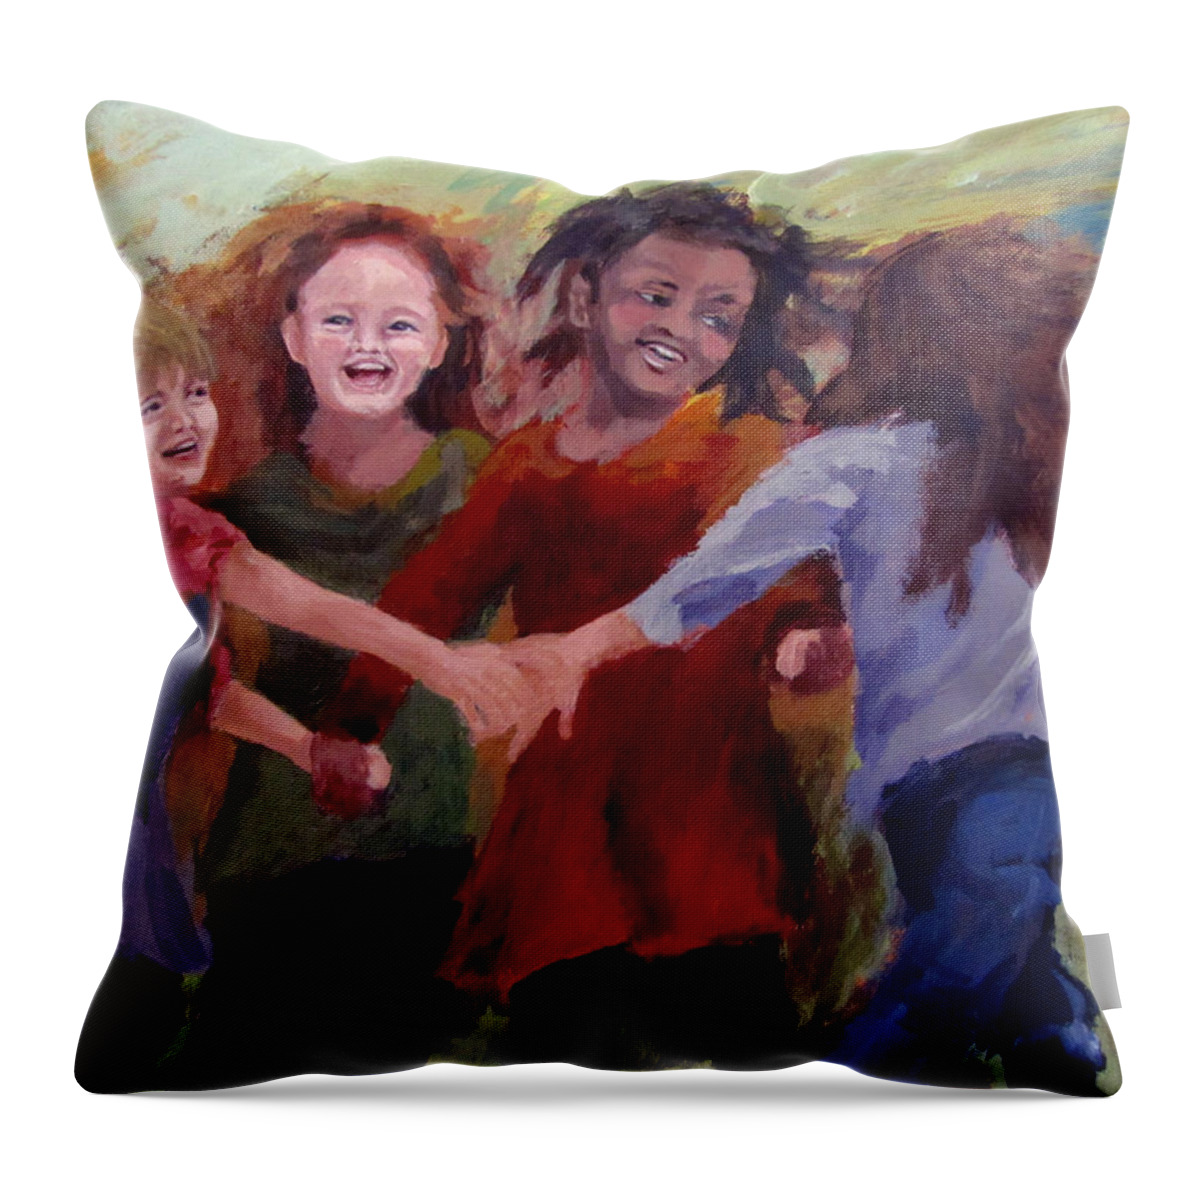 Children Throw Pillow featuring the painting Lets Dance by Karen Ilari